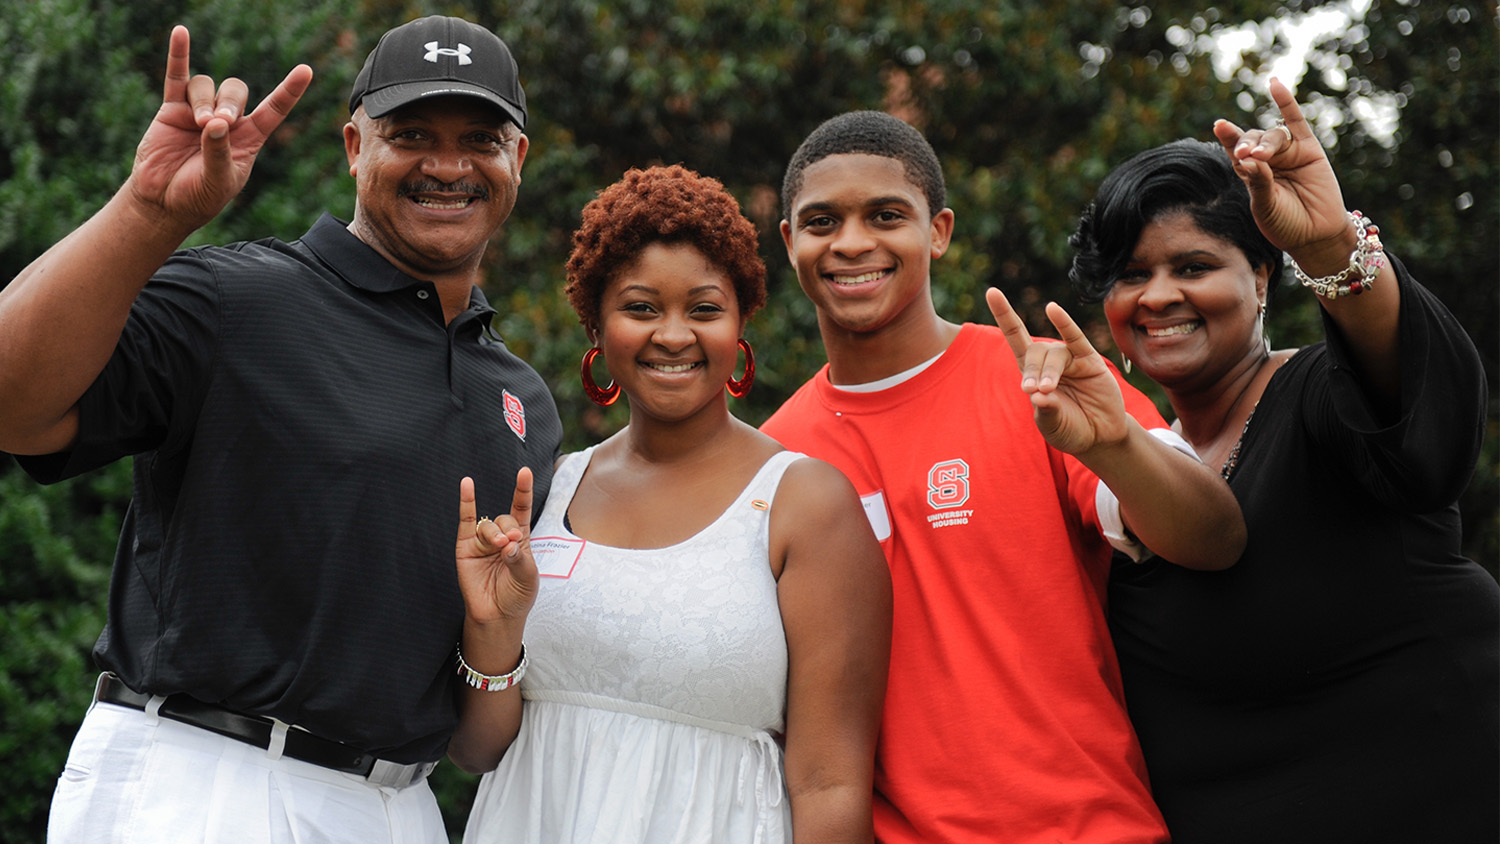 A family supporting the NC State Wolfpack